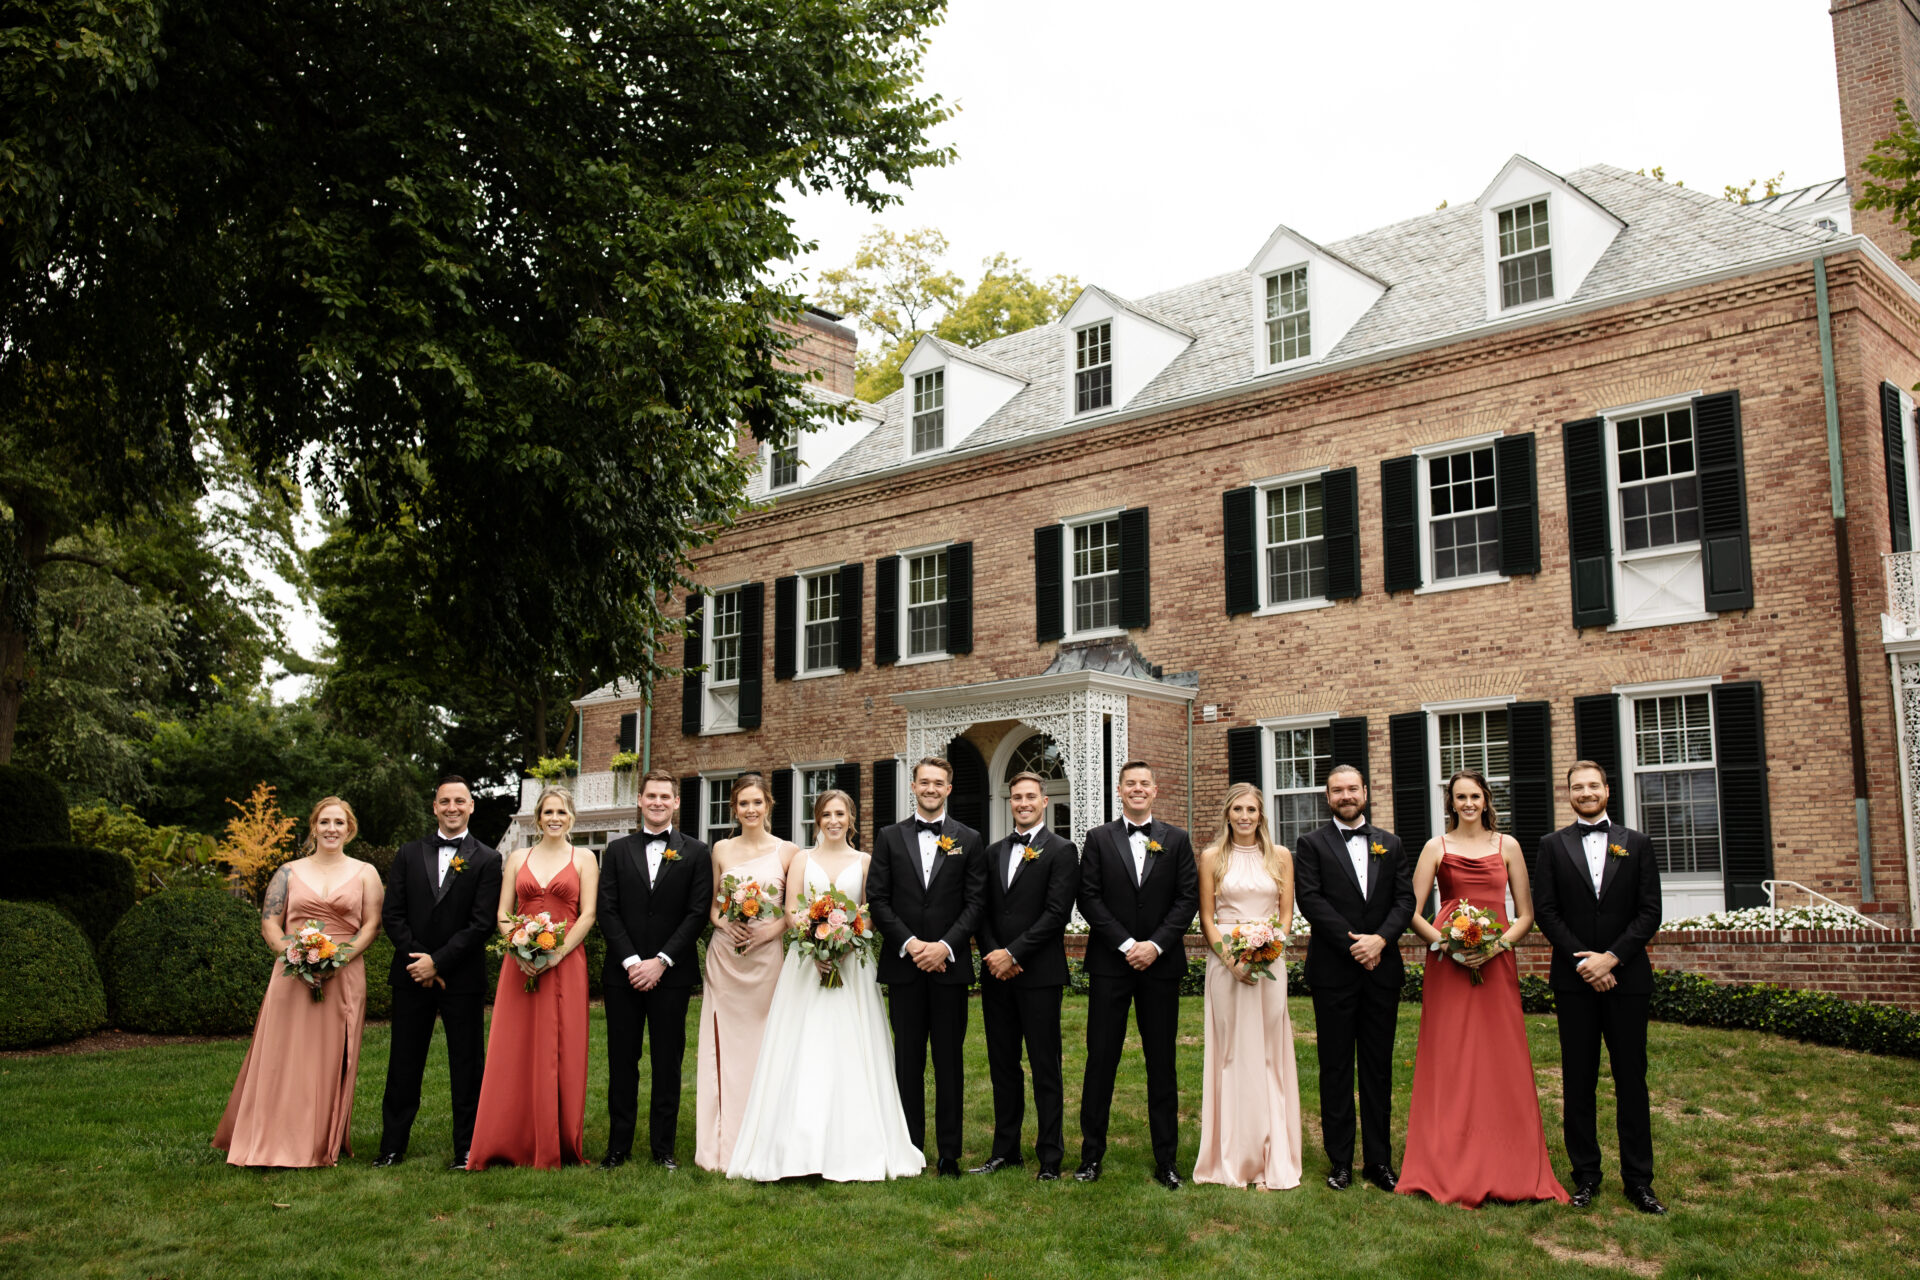 wedding party with bridesmaids in mismatched dresses